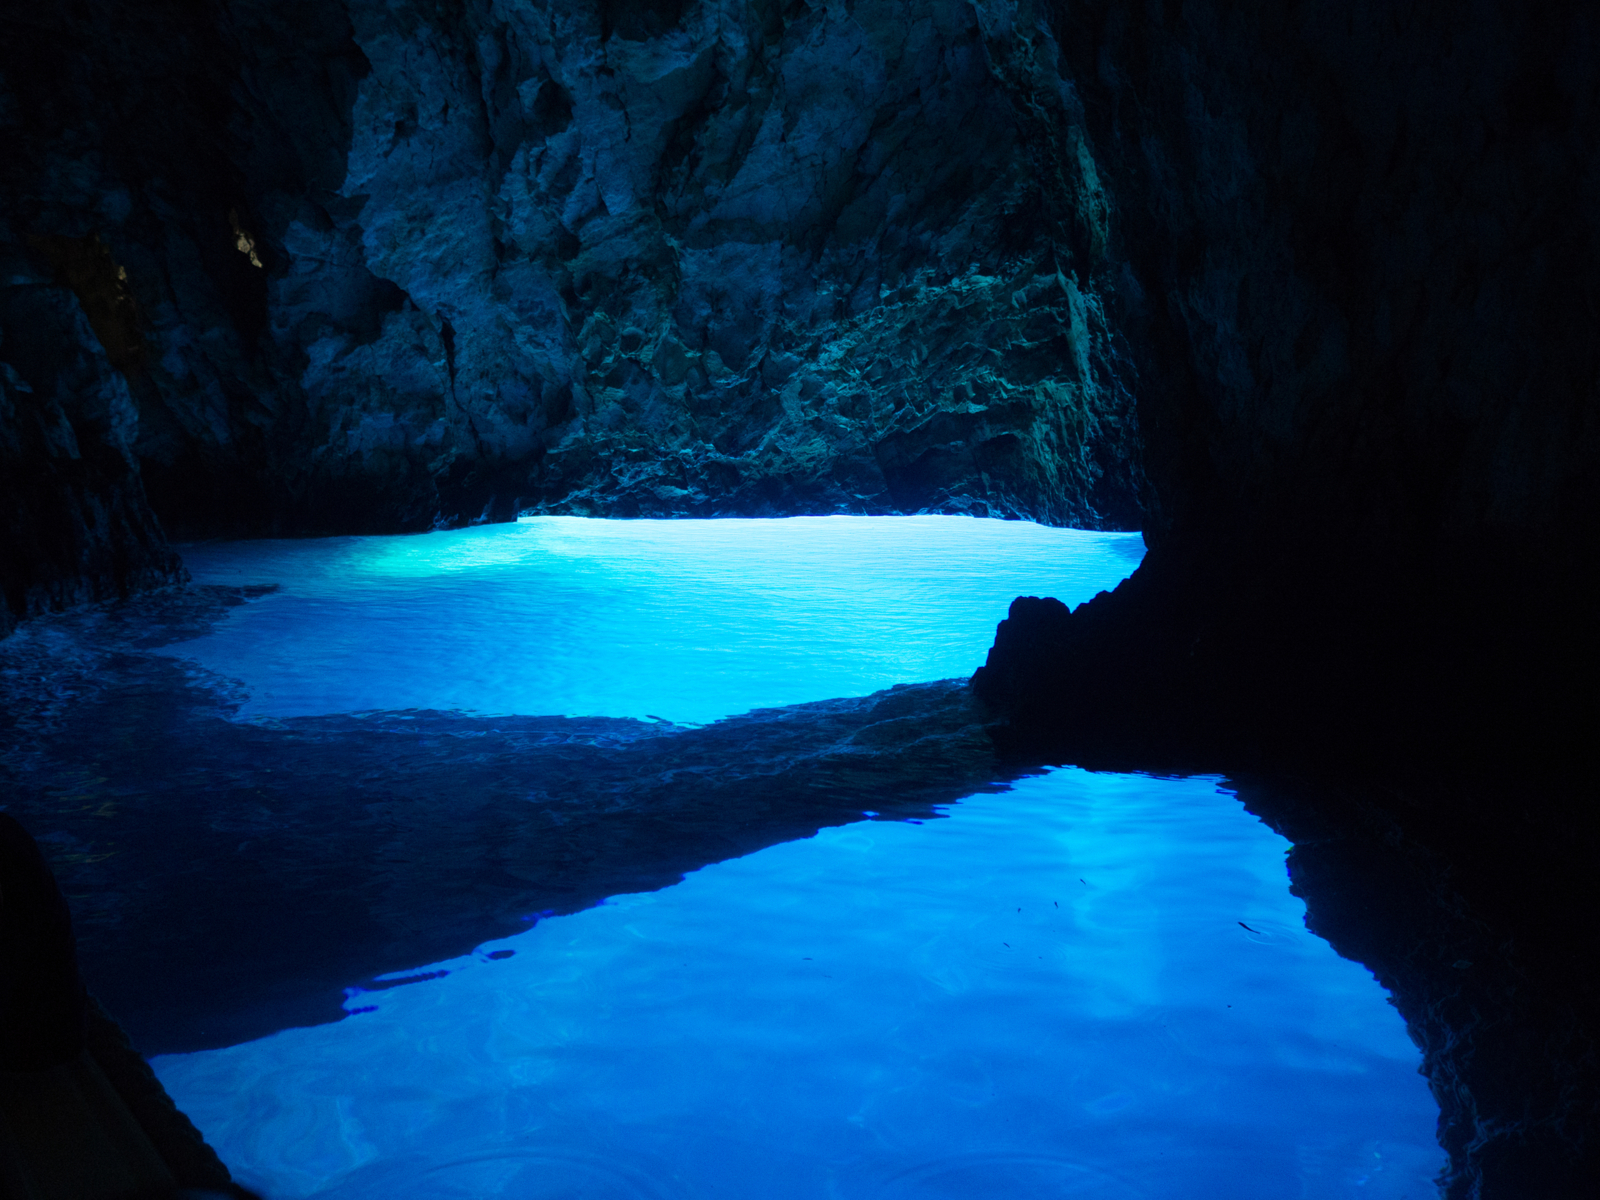 Blue Cave Grotto, one of the best things to do in Croatia, pictured during the afternoon with blue water below the rocks